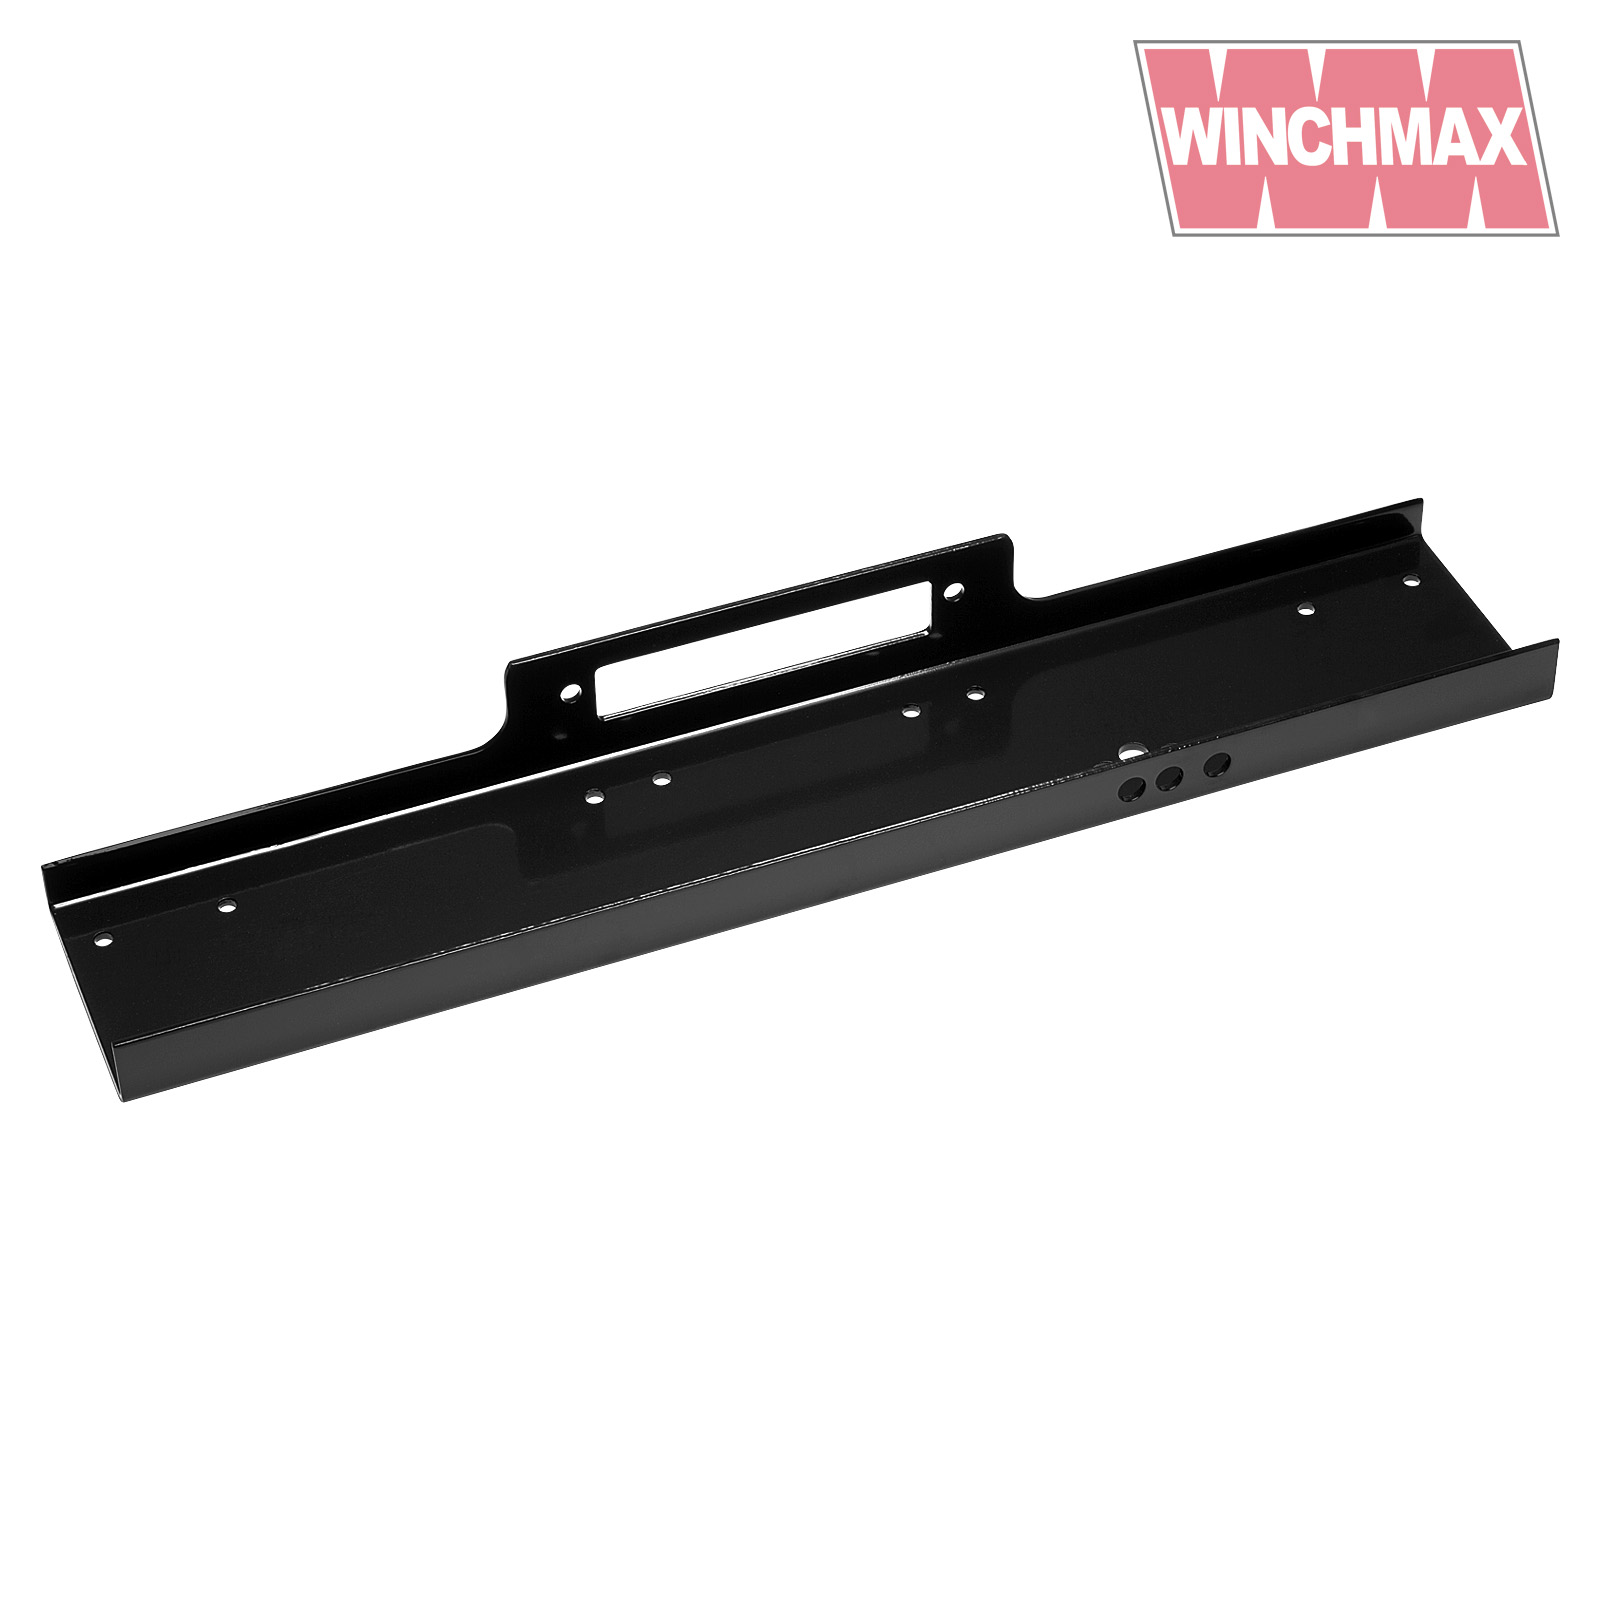 Winchmax Mounting plate